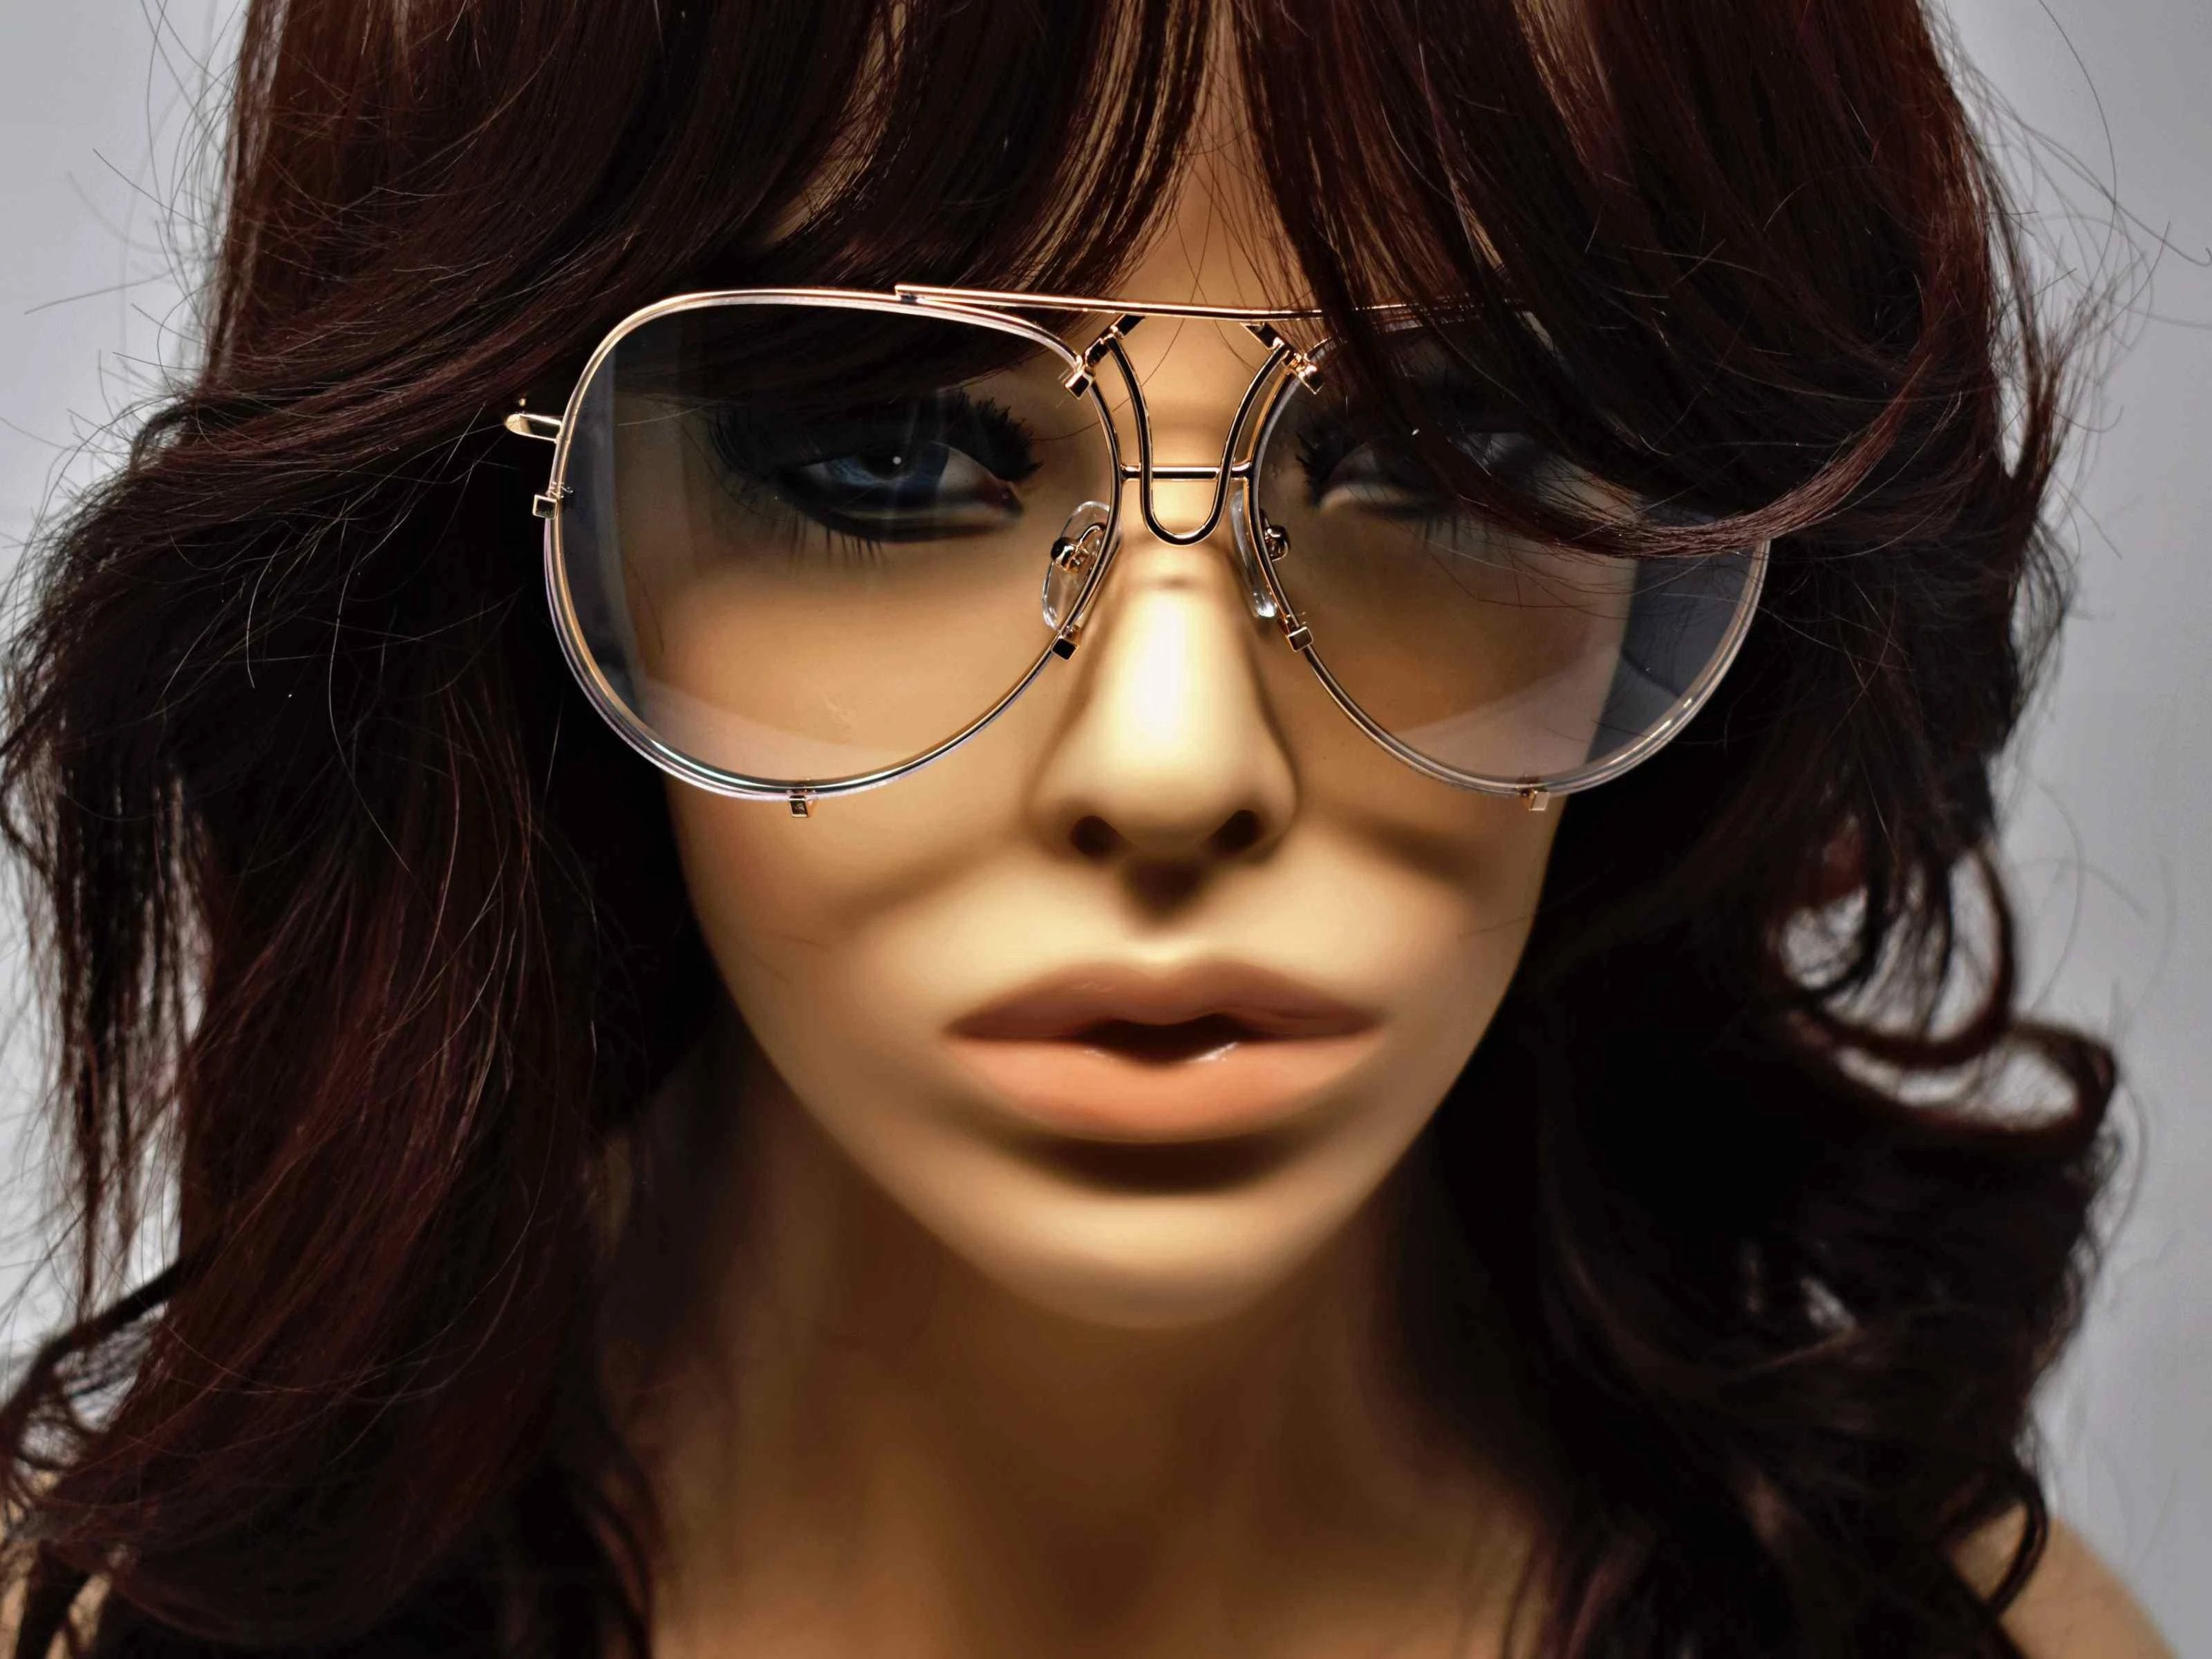 Make sure you indulge in our brilliant Viburnum gold aviator style glasses with a clear lens. 